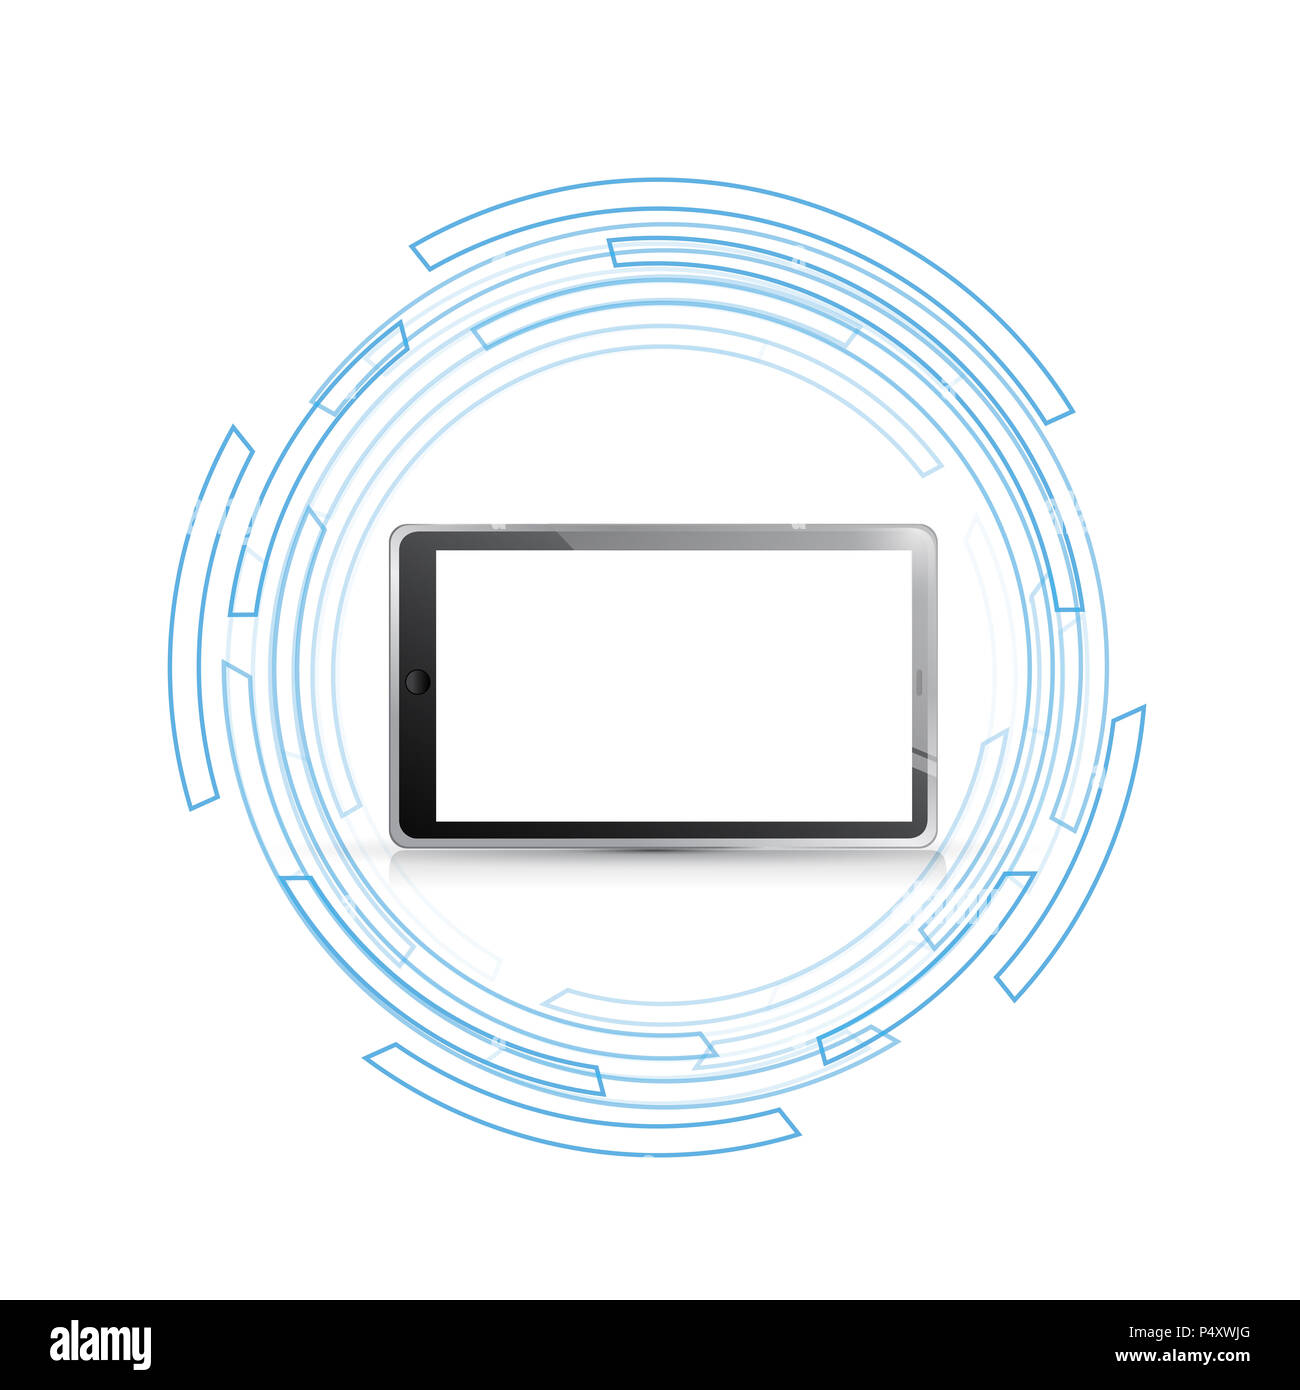 tablet over moving technology circle graphics. illustration design over white background. Stock Photo